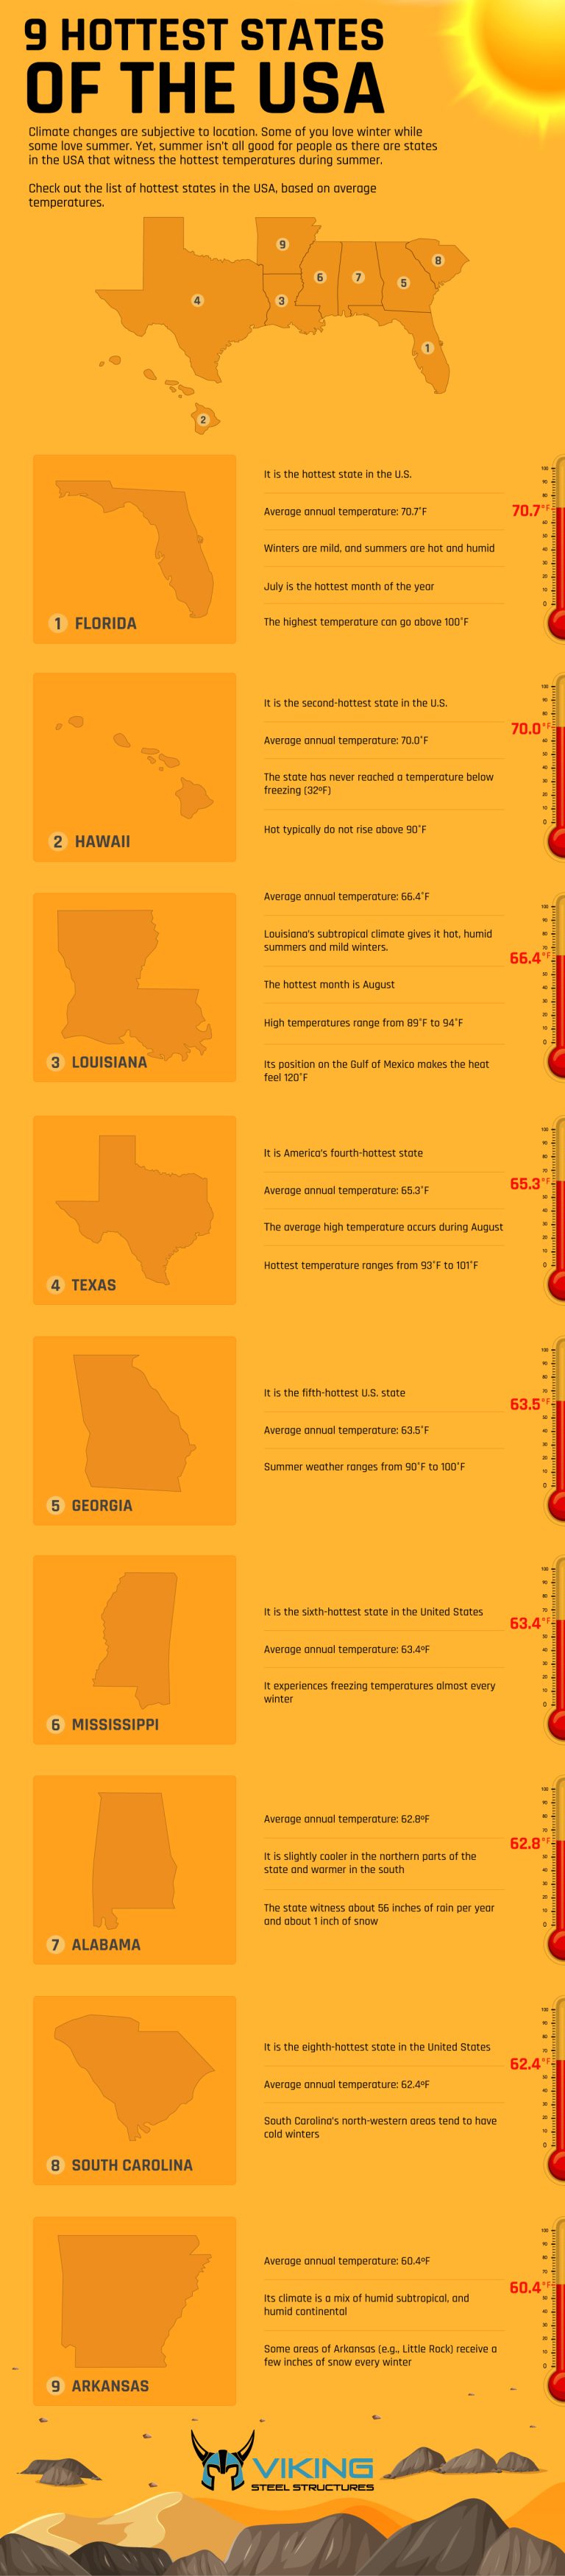 9 Hottest States of the USA